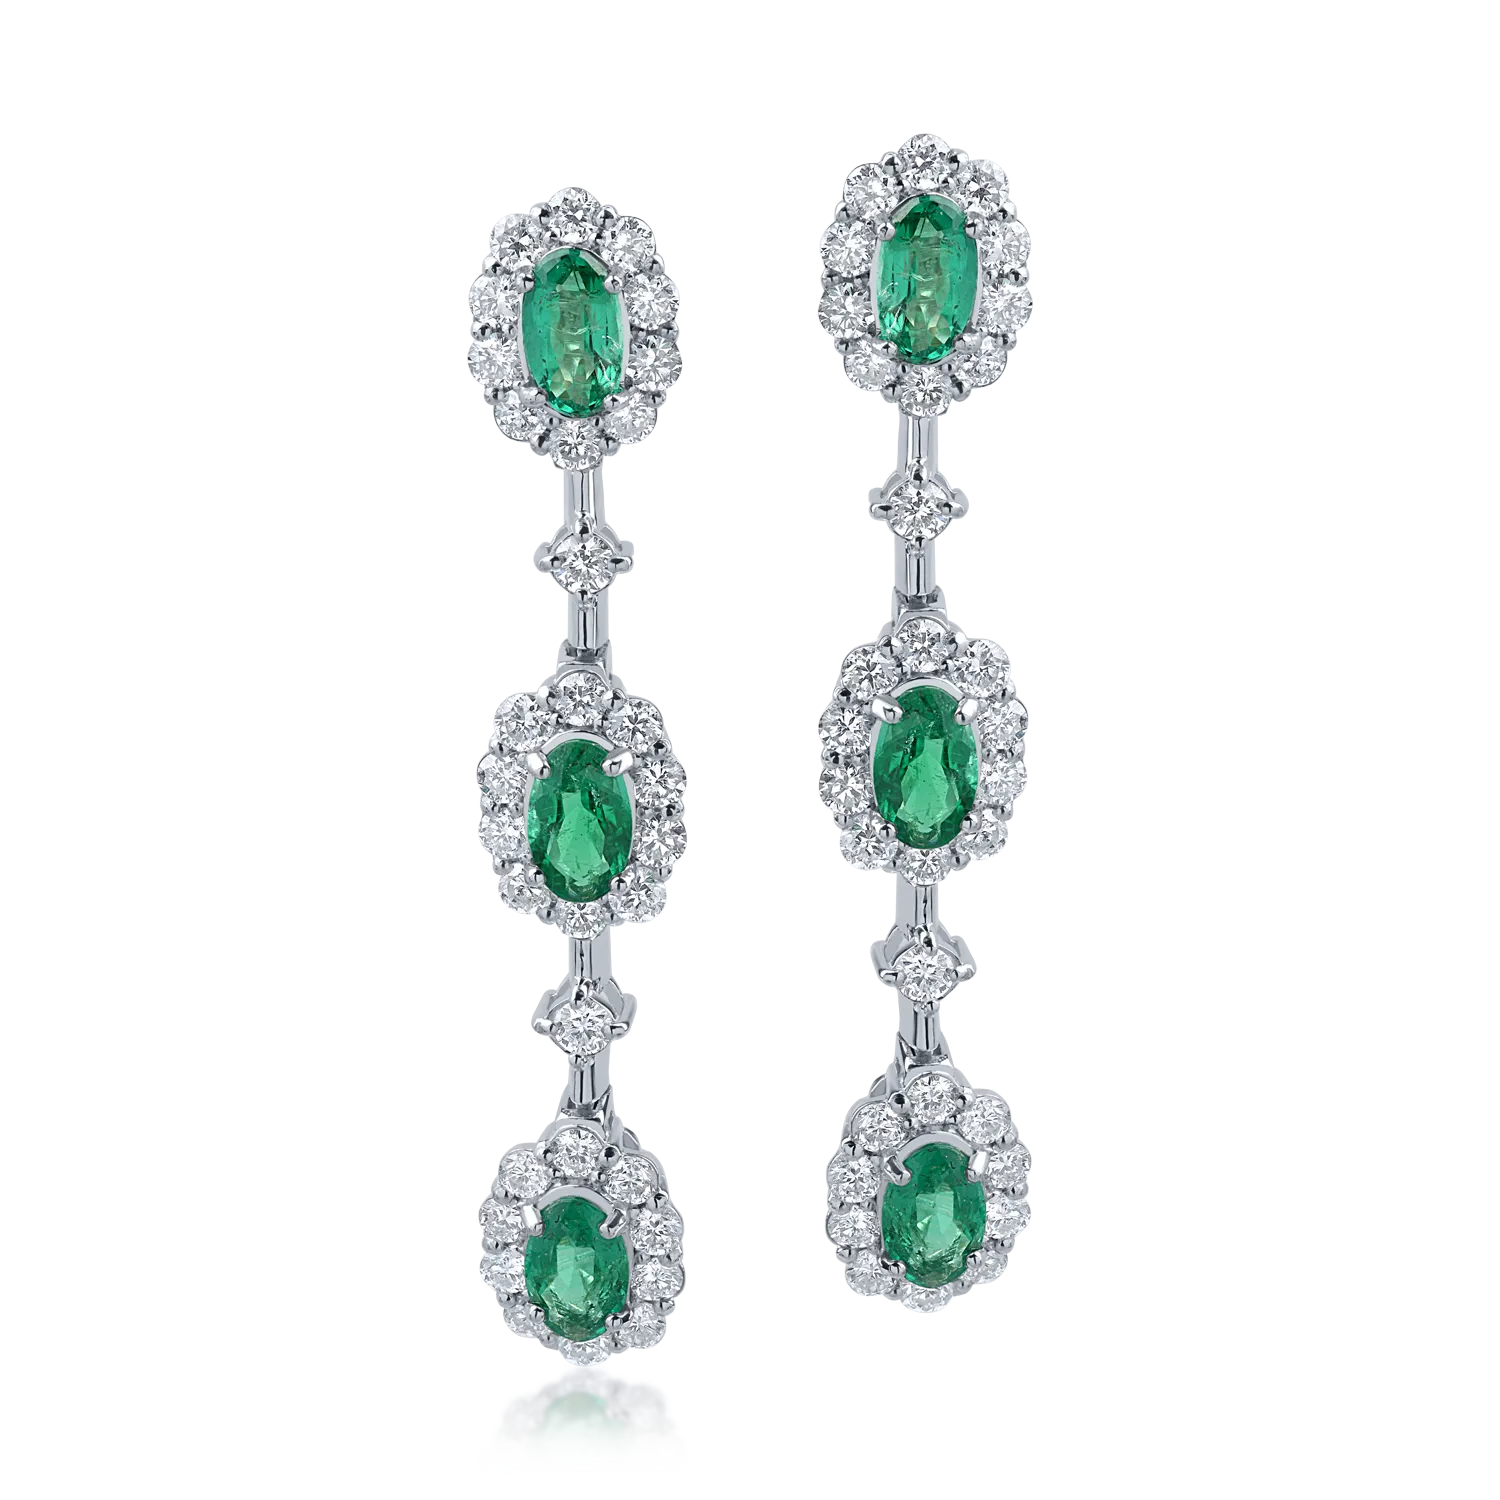 Platinum earrings with 1.24ct emeralds and 1.14ct diamonds